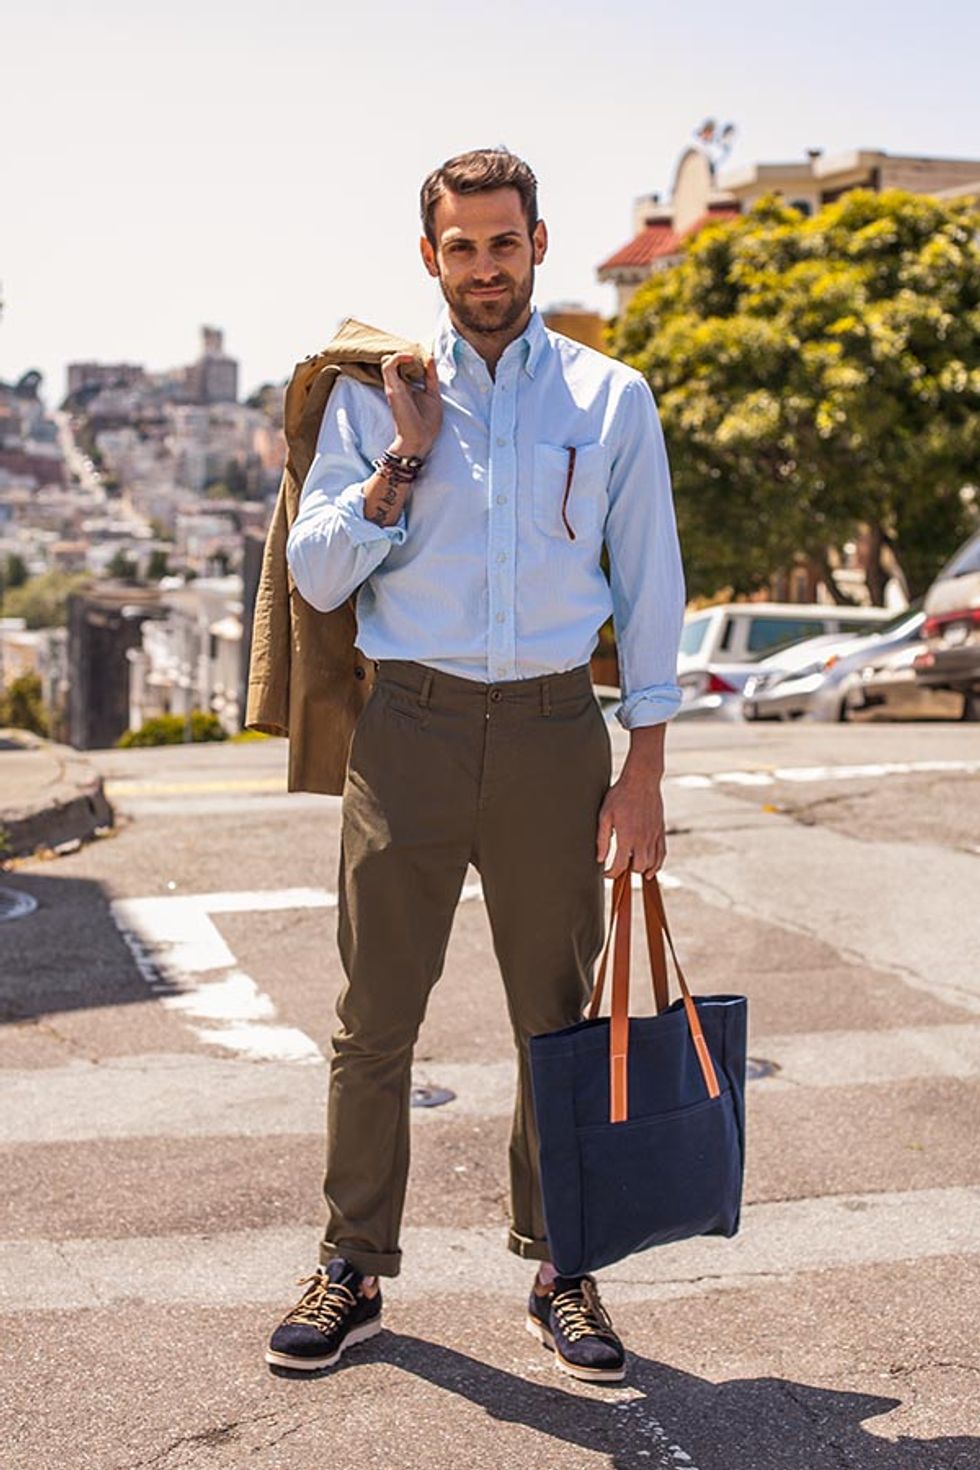 Street Style Report: Two Looks from ACRE/SF, in North Beach